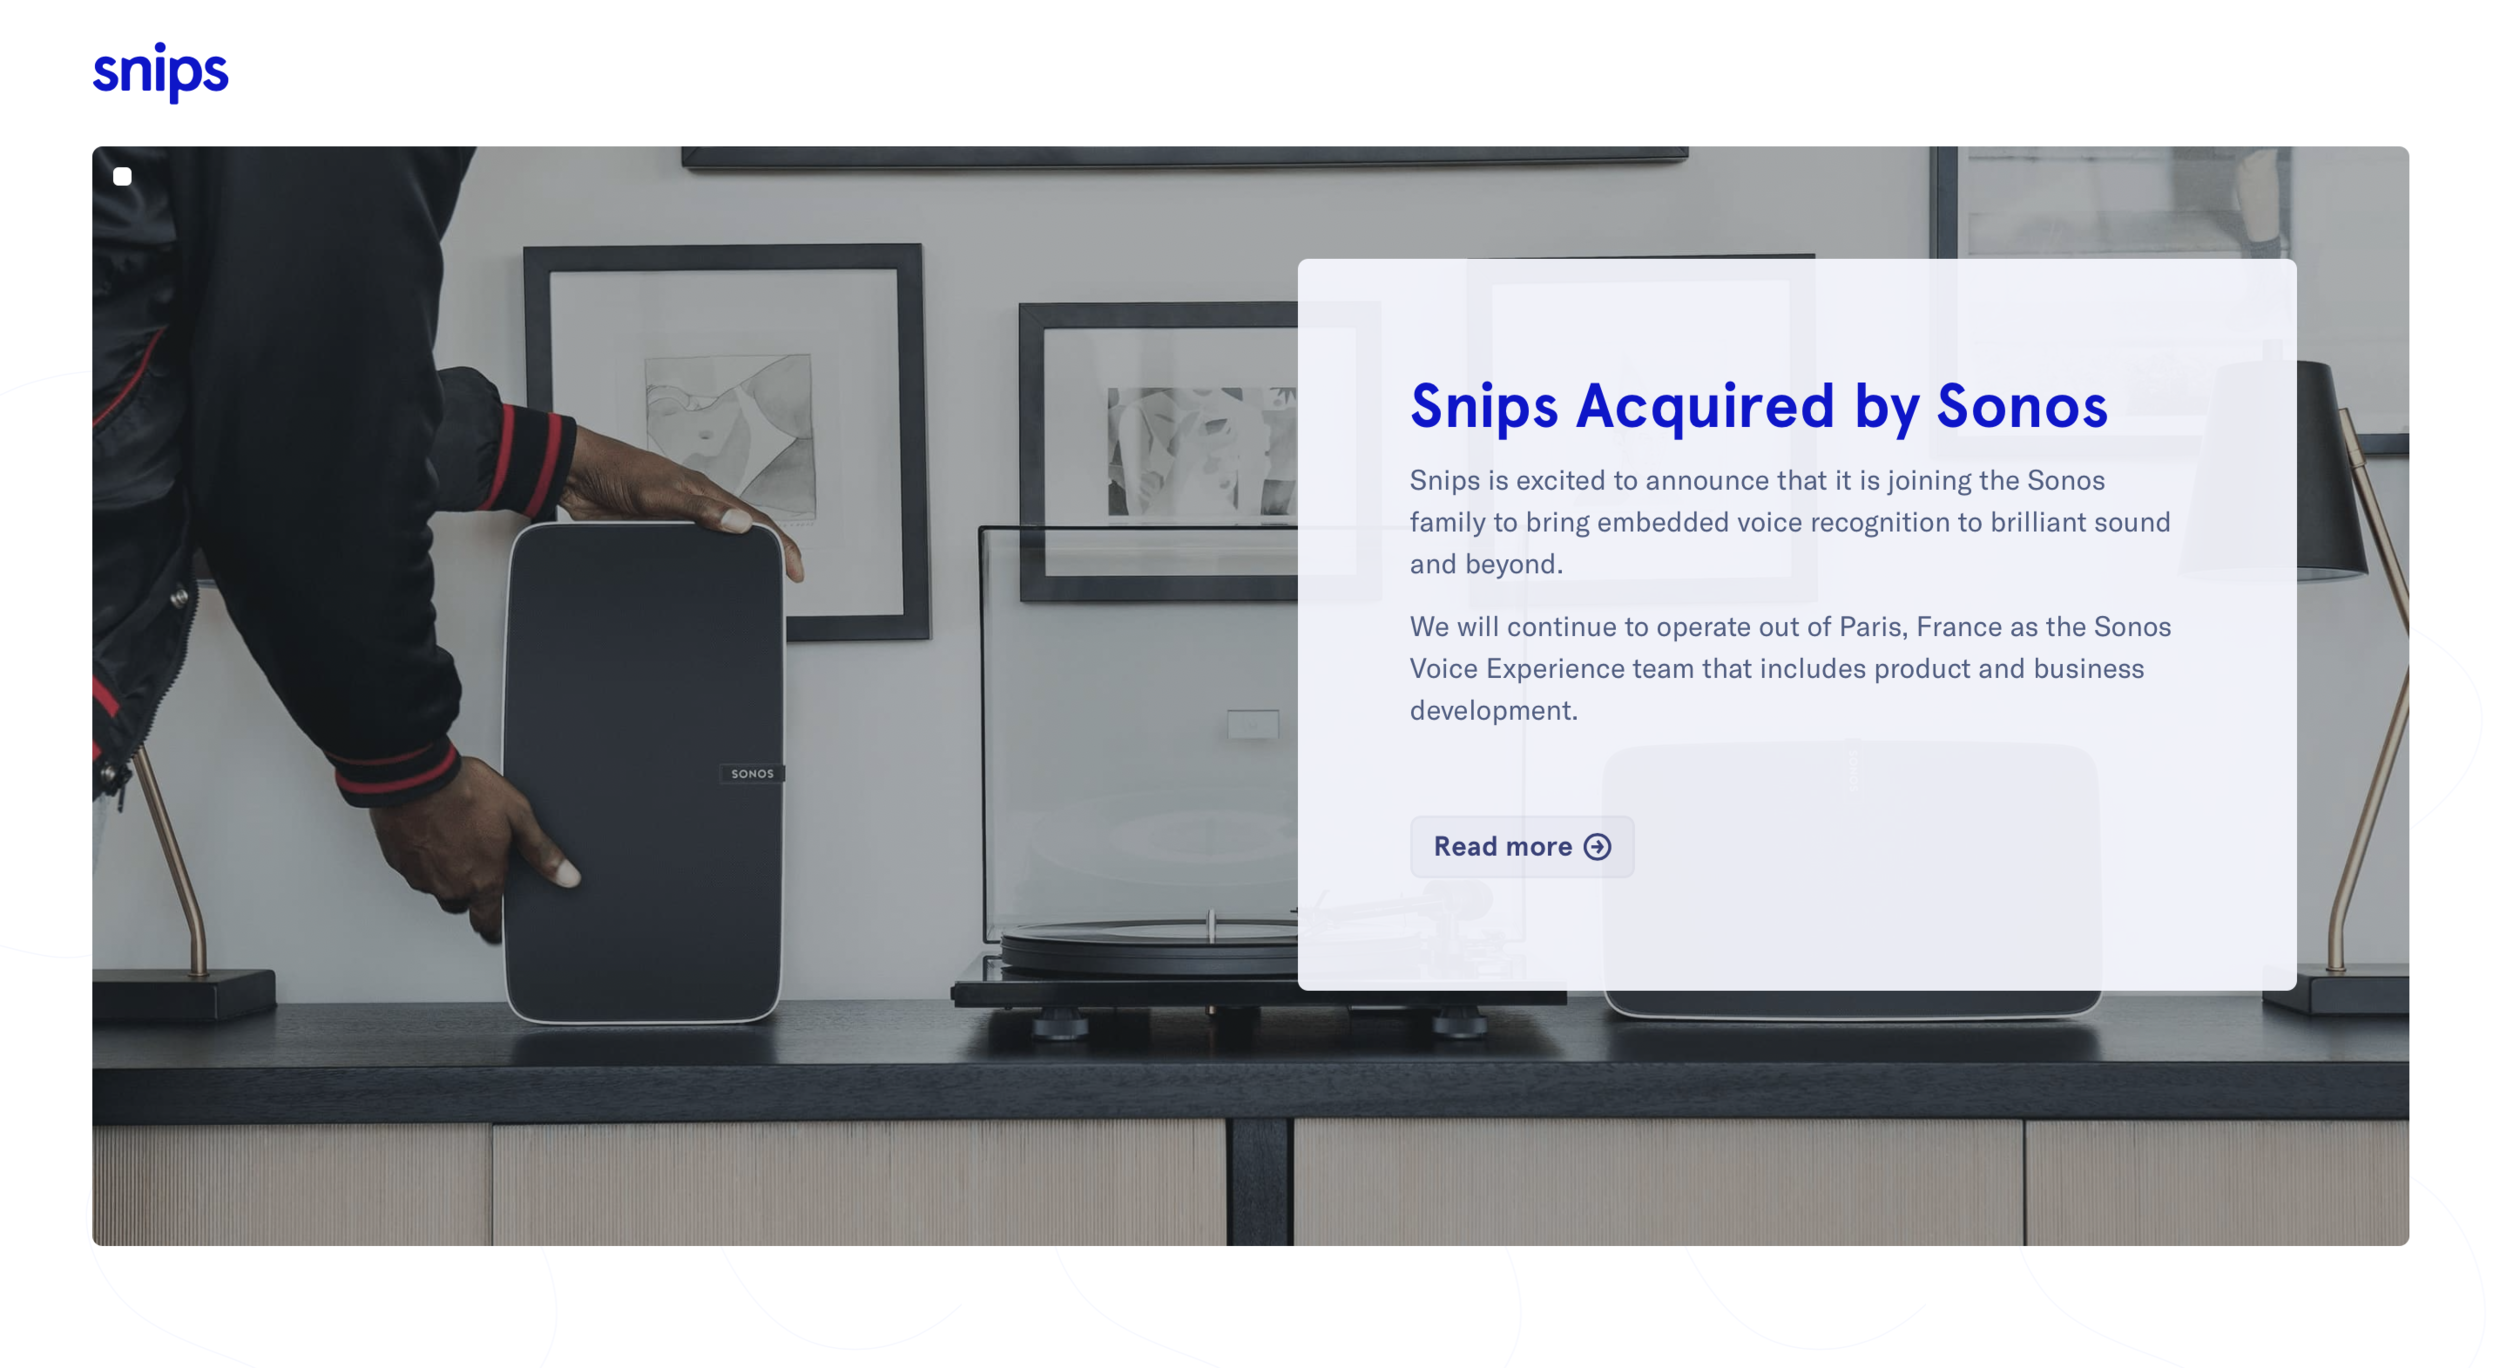 snips acquired by sonos.png